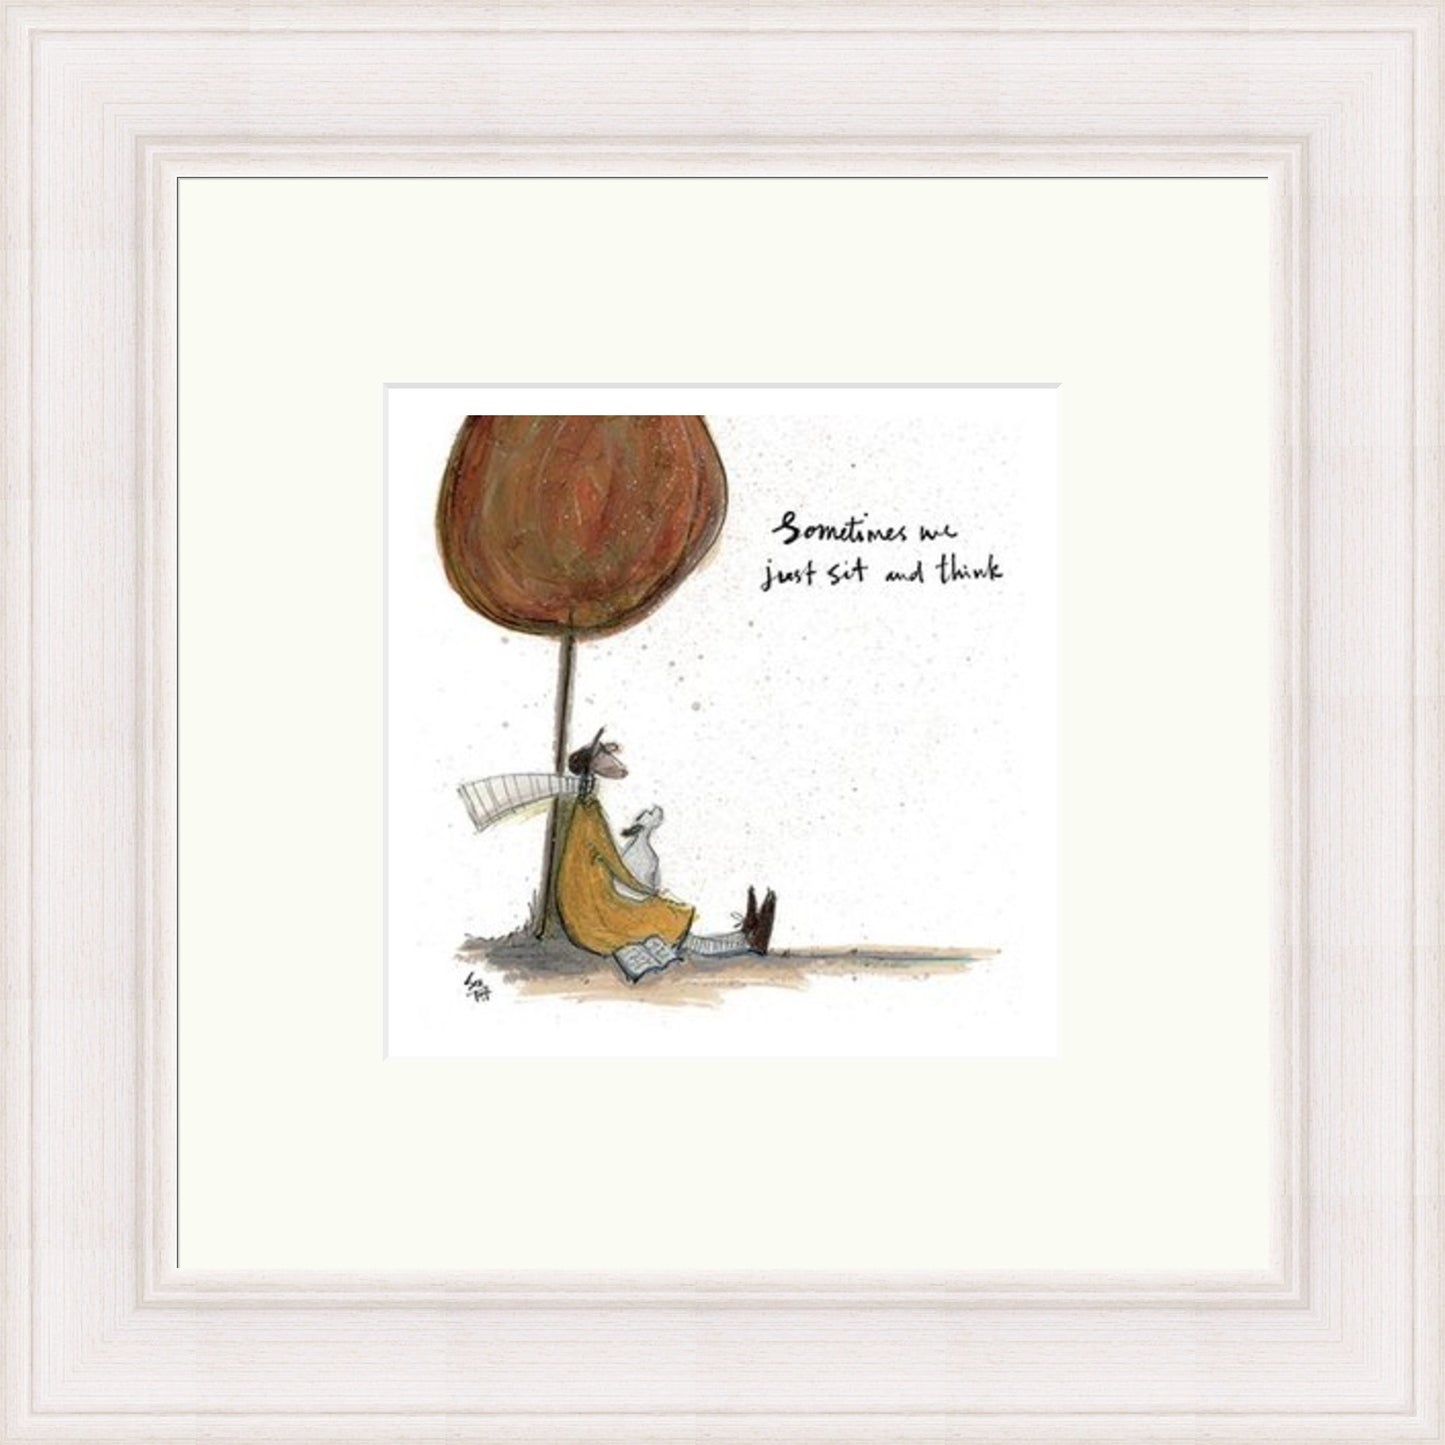 Sometimes We Just Sit and Think by Sam Toft